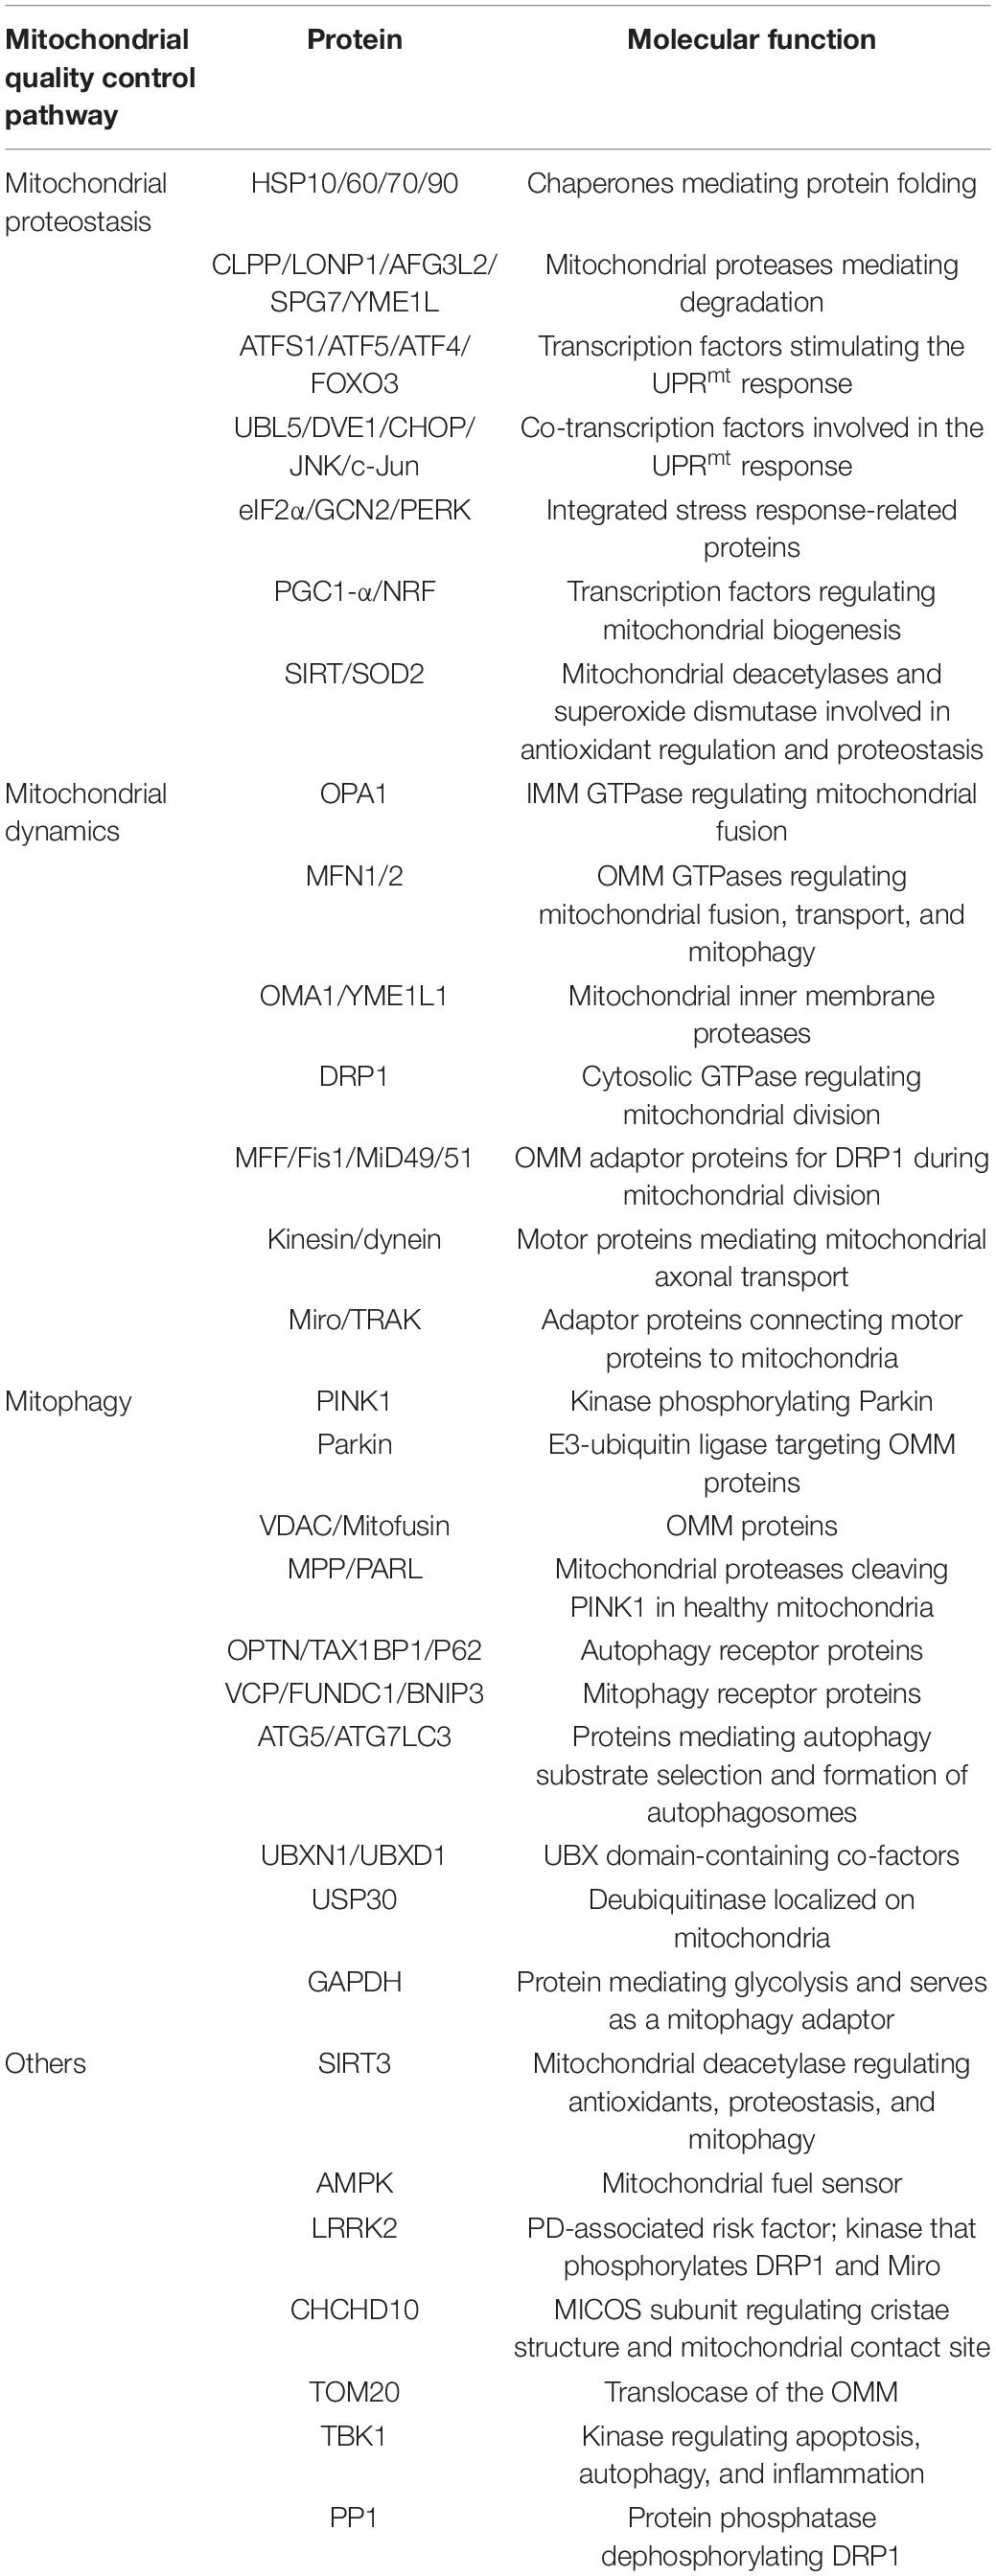 Frontiers | Mitochondrial Quality Control Strategies: Potential 